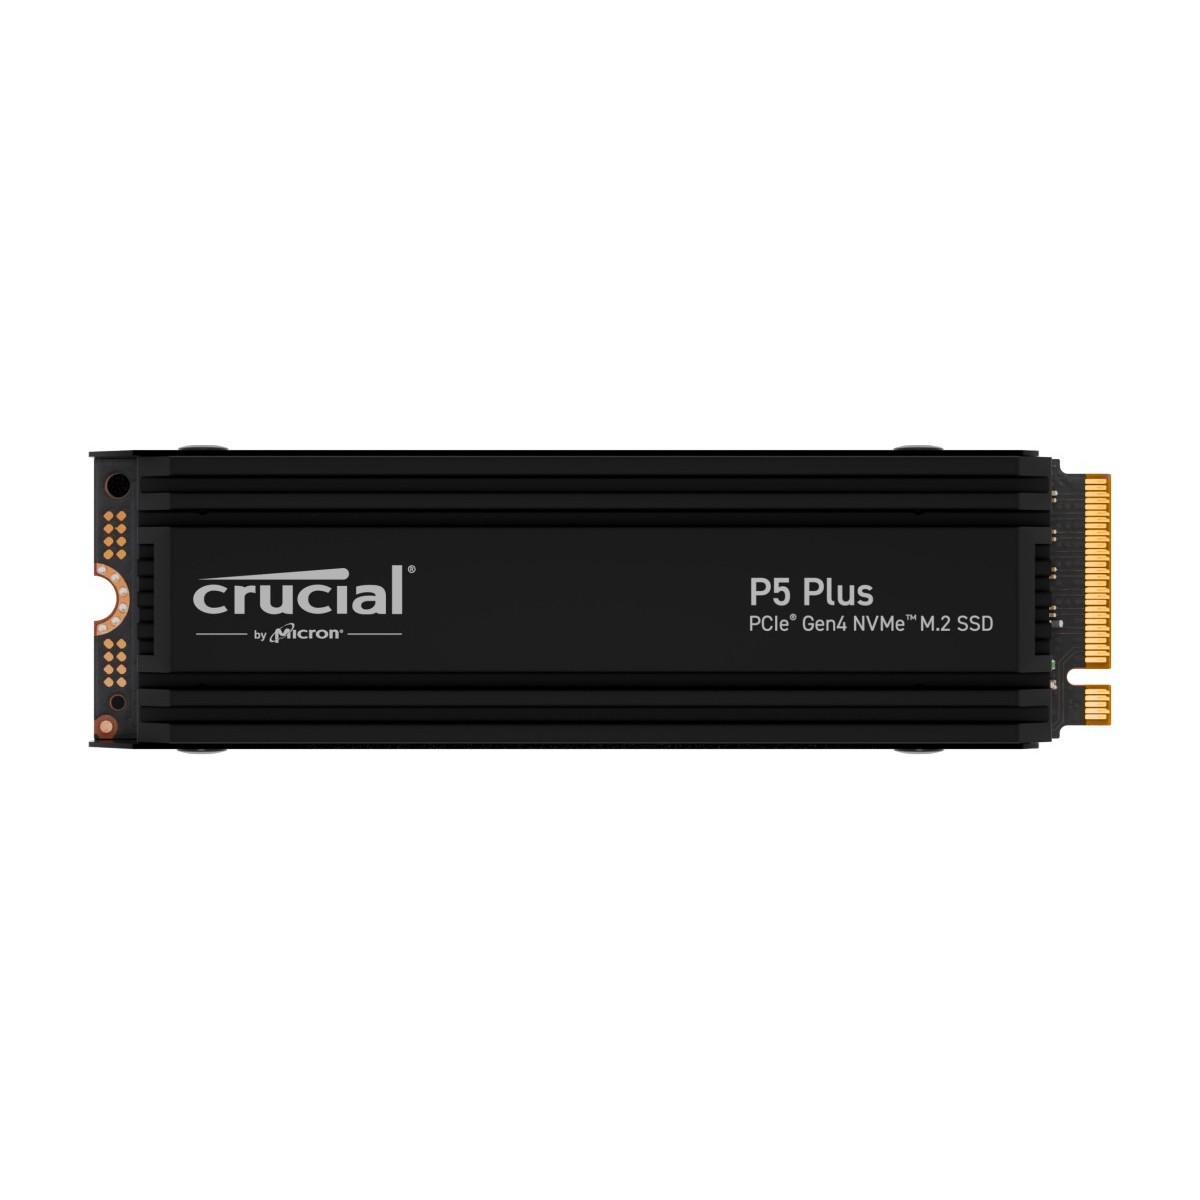 Crucial P5 PLUS 2TB GEN4 NVME M.2 SSD - Solid State Disk - NVMe